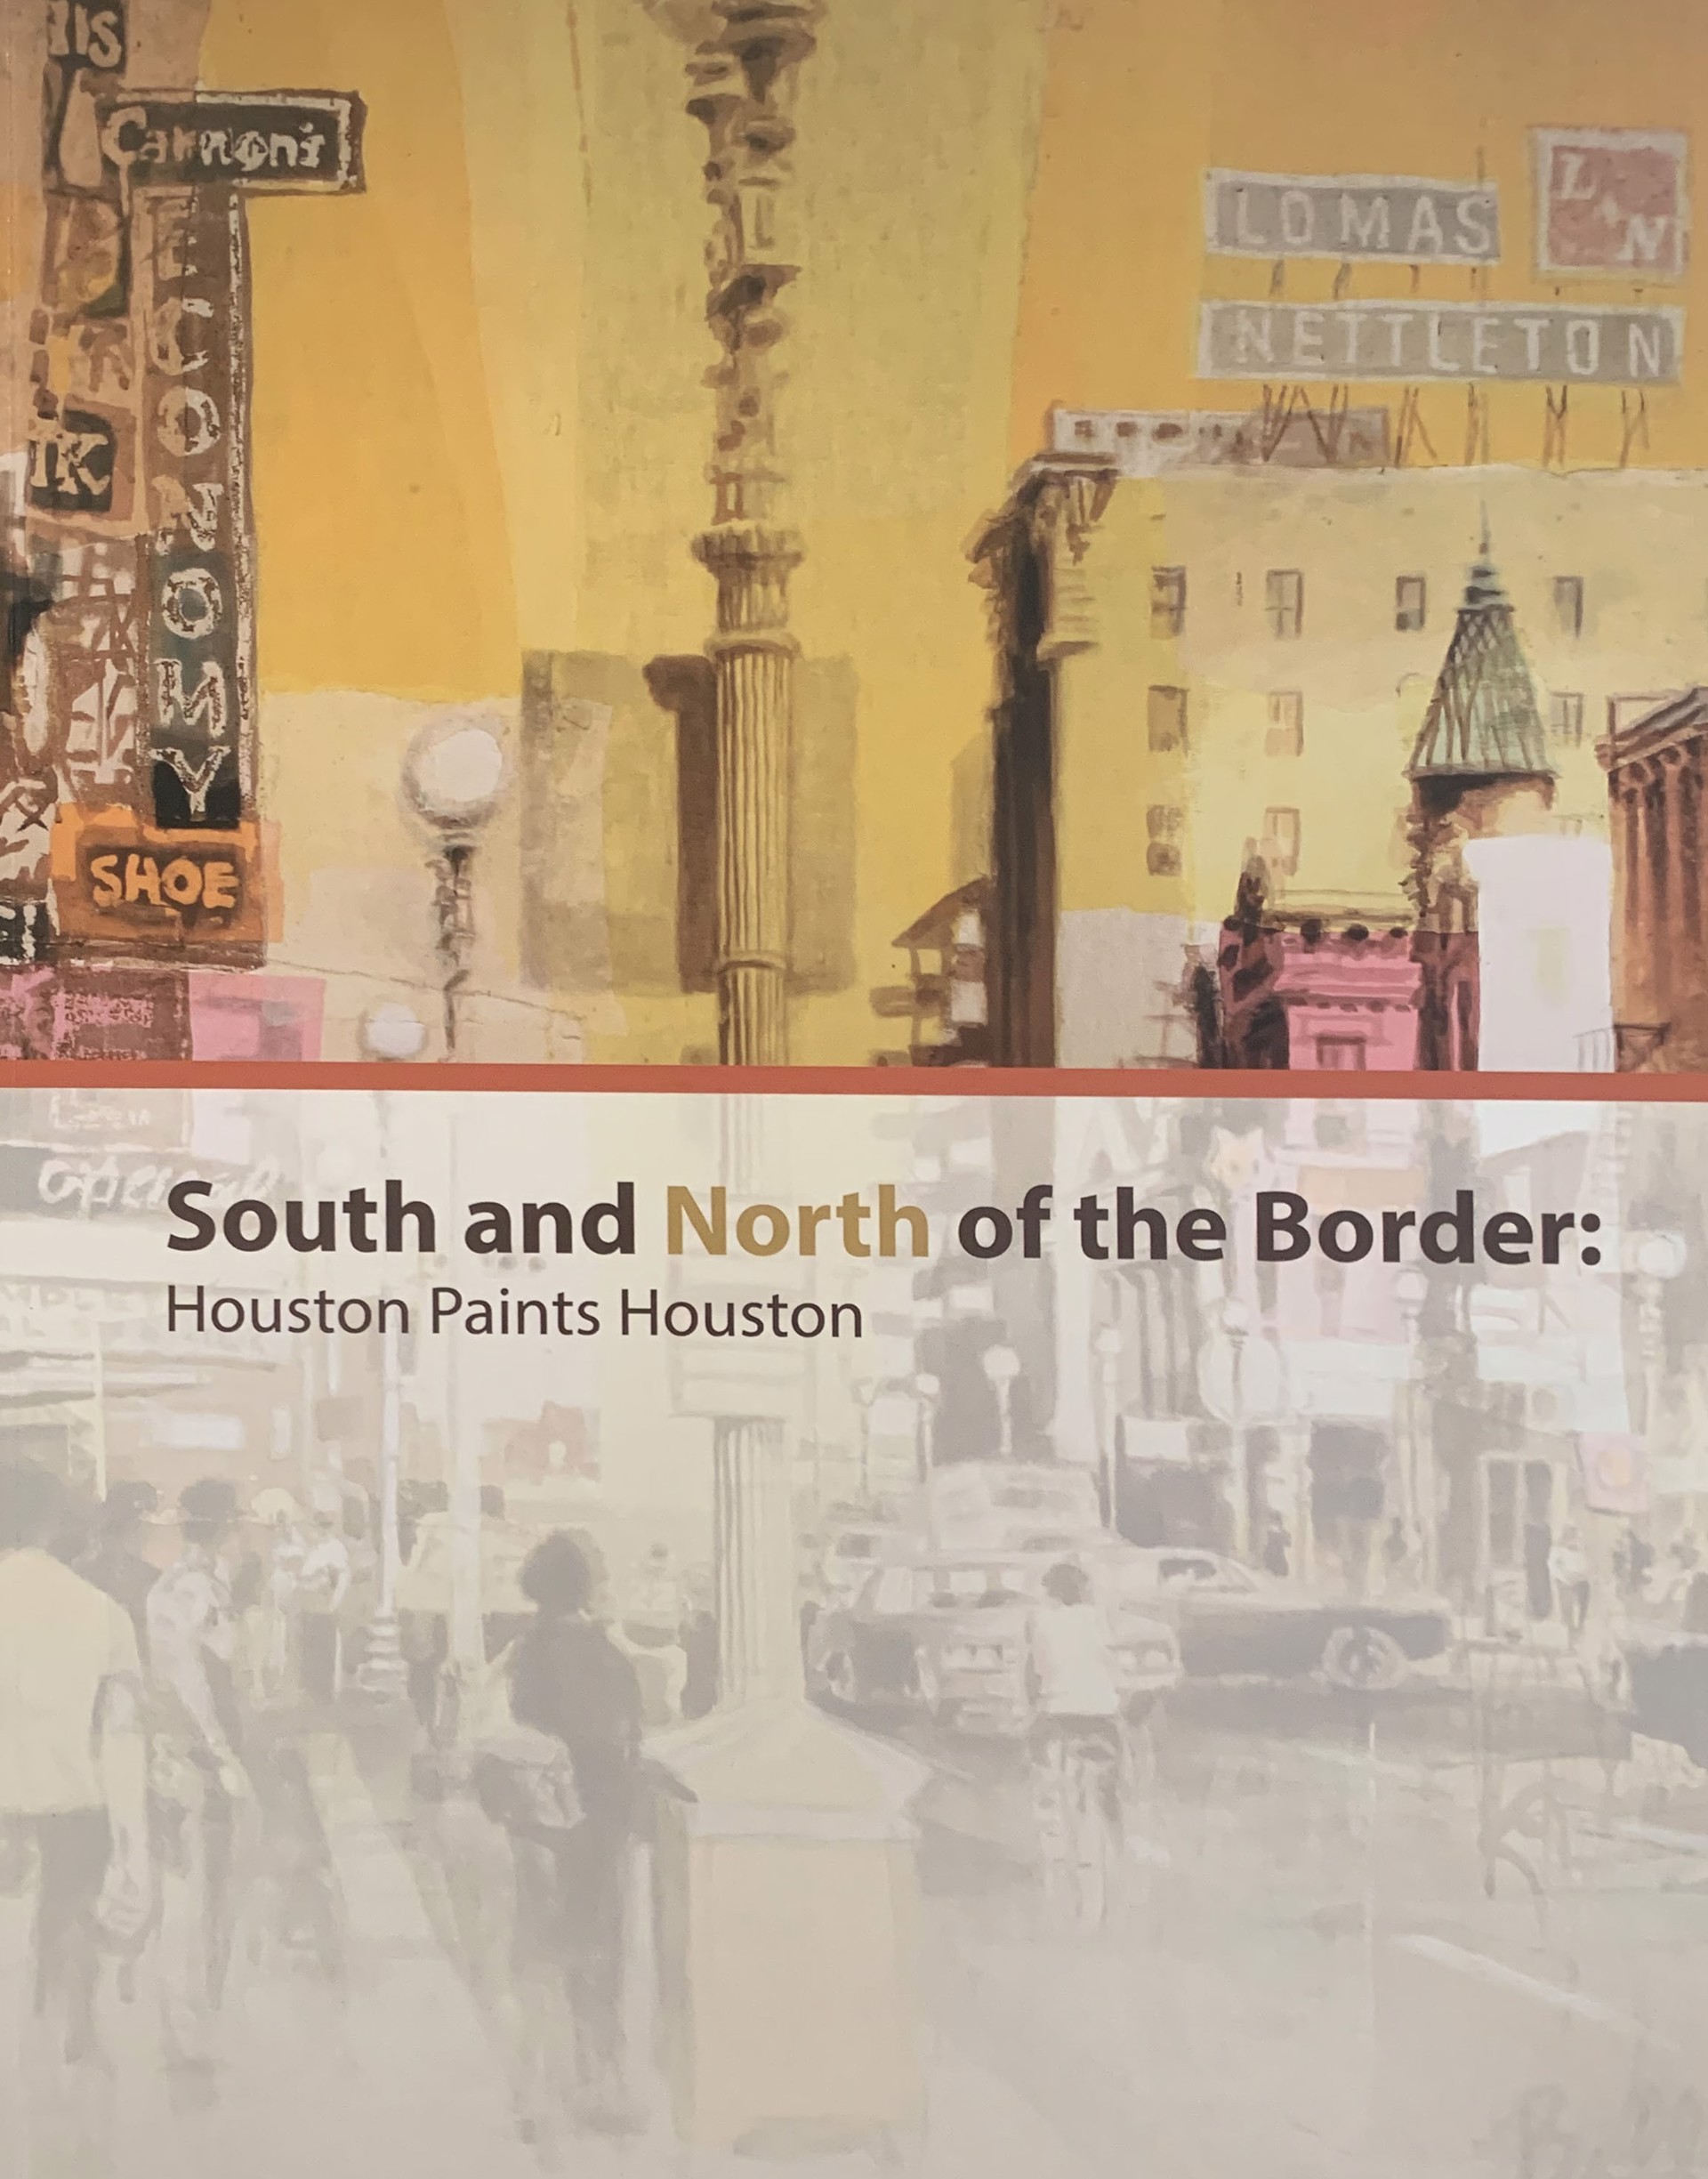 South and North of the Border: Houston Paints Houston by Publications